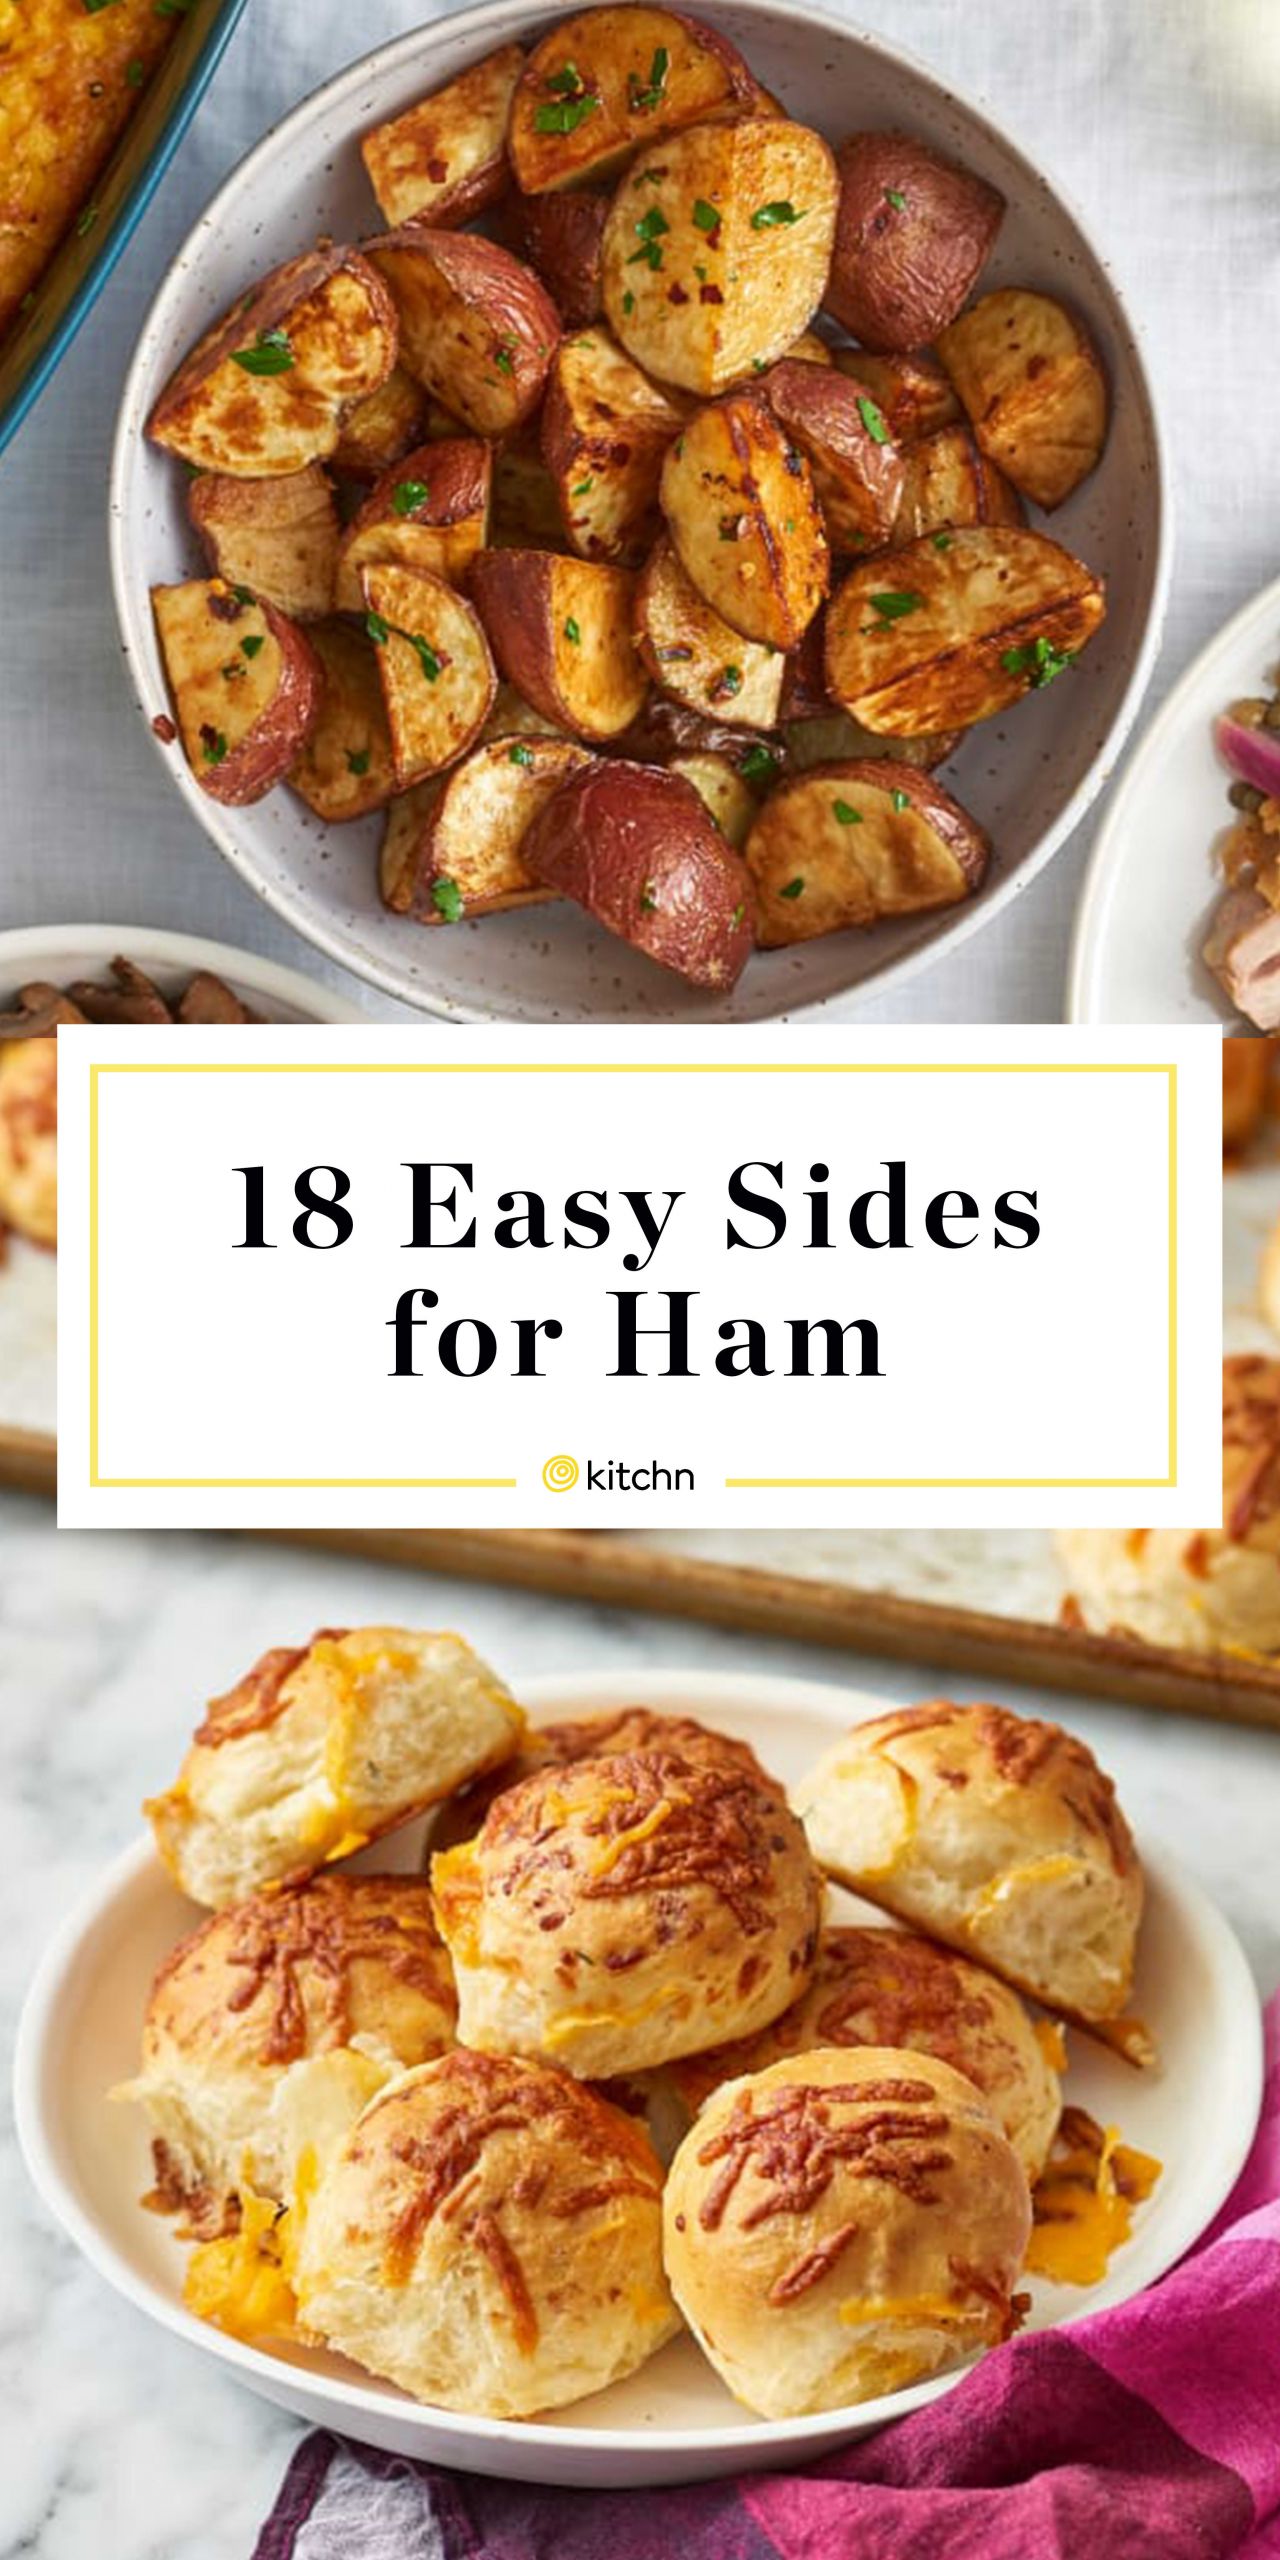 Easter Dinner Side Dishes With Ham
 18 Delicious Side Dishes for Ham